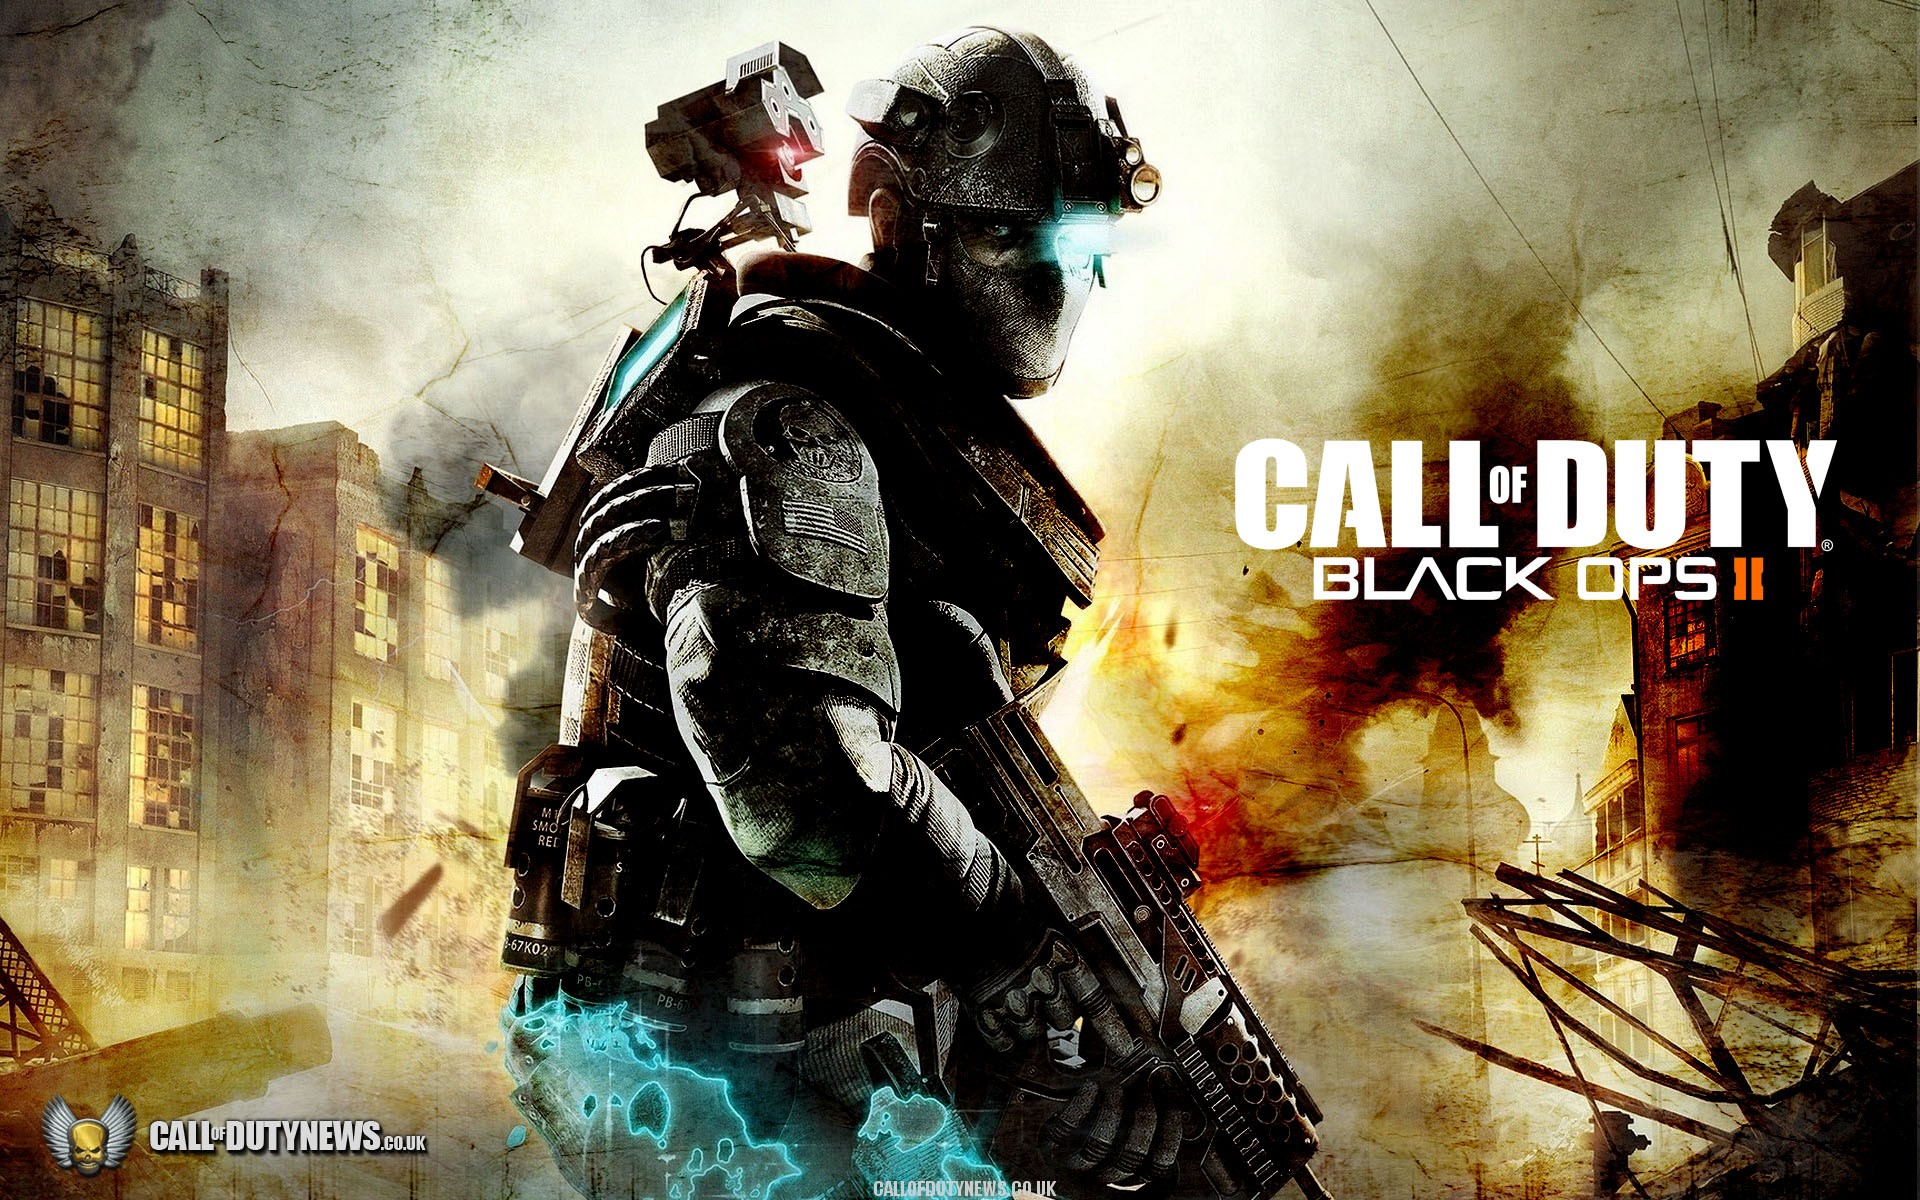 call of duty black ops 2 skidrow crack fix download